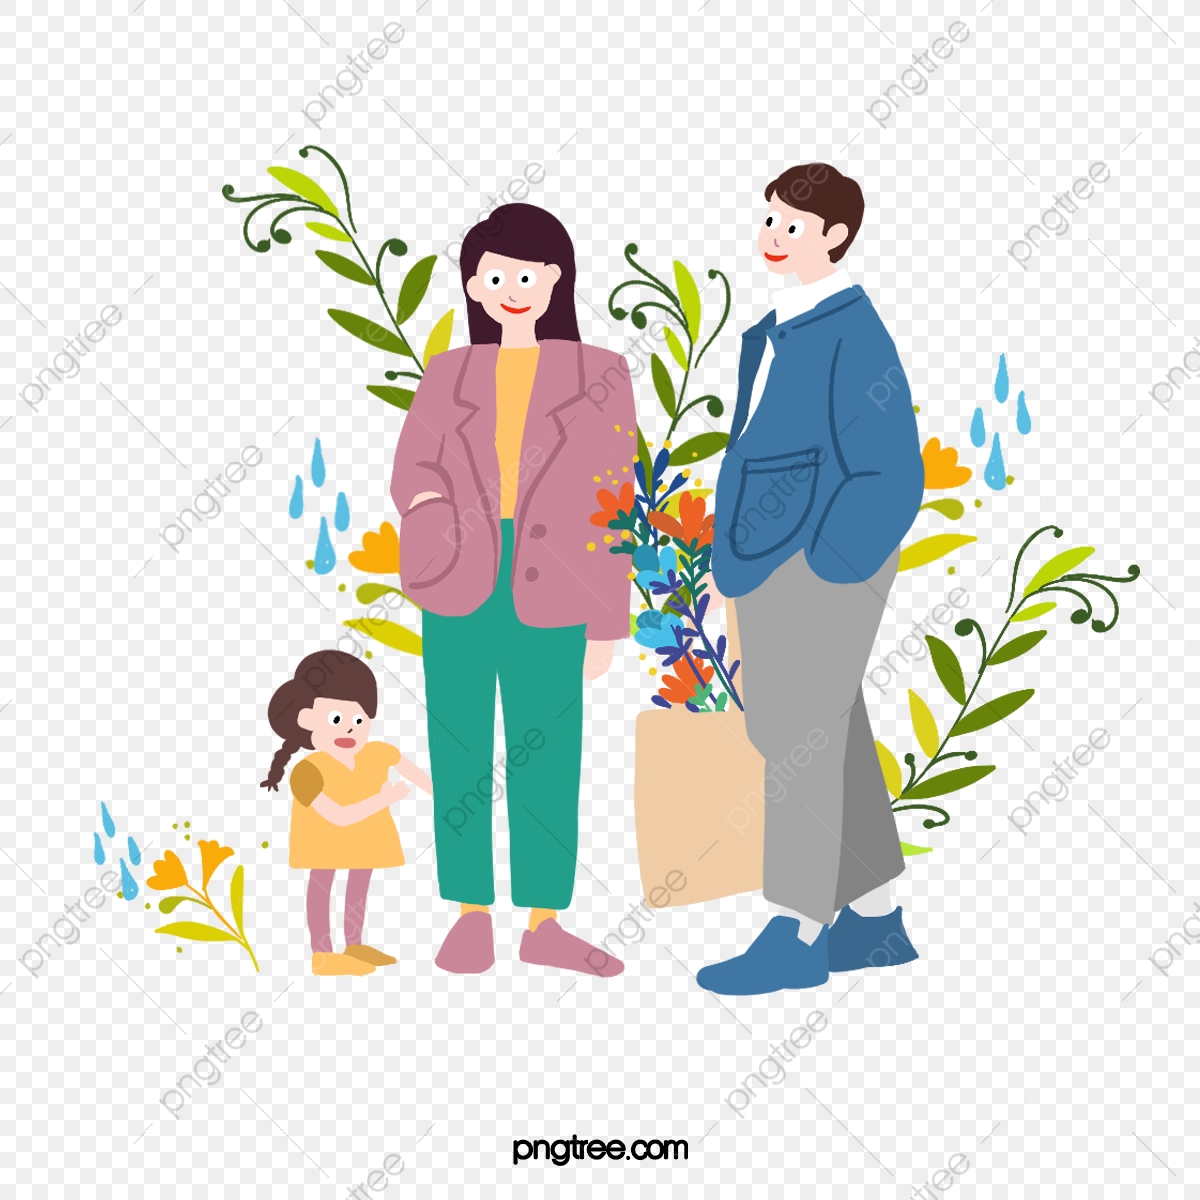 Hand Painted Elements Of Family Characters On Parentsday, Hand Pluspng.com  - Parents Day, Transparent background PNG HD thumbnail